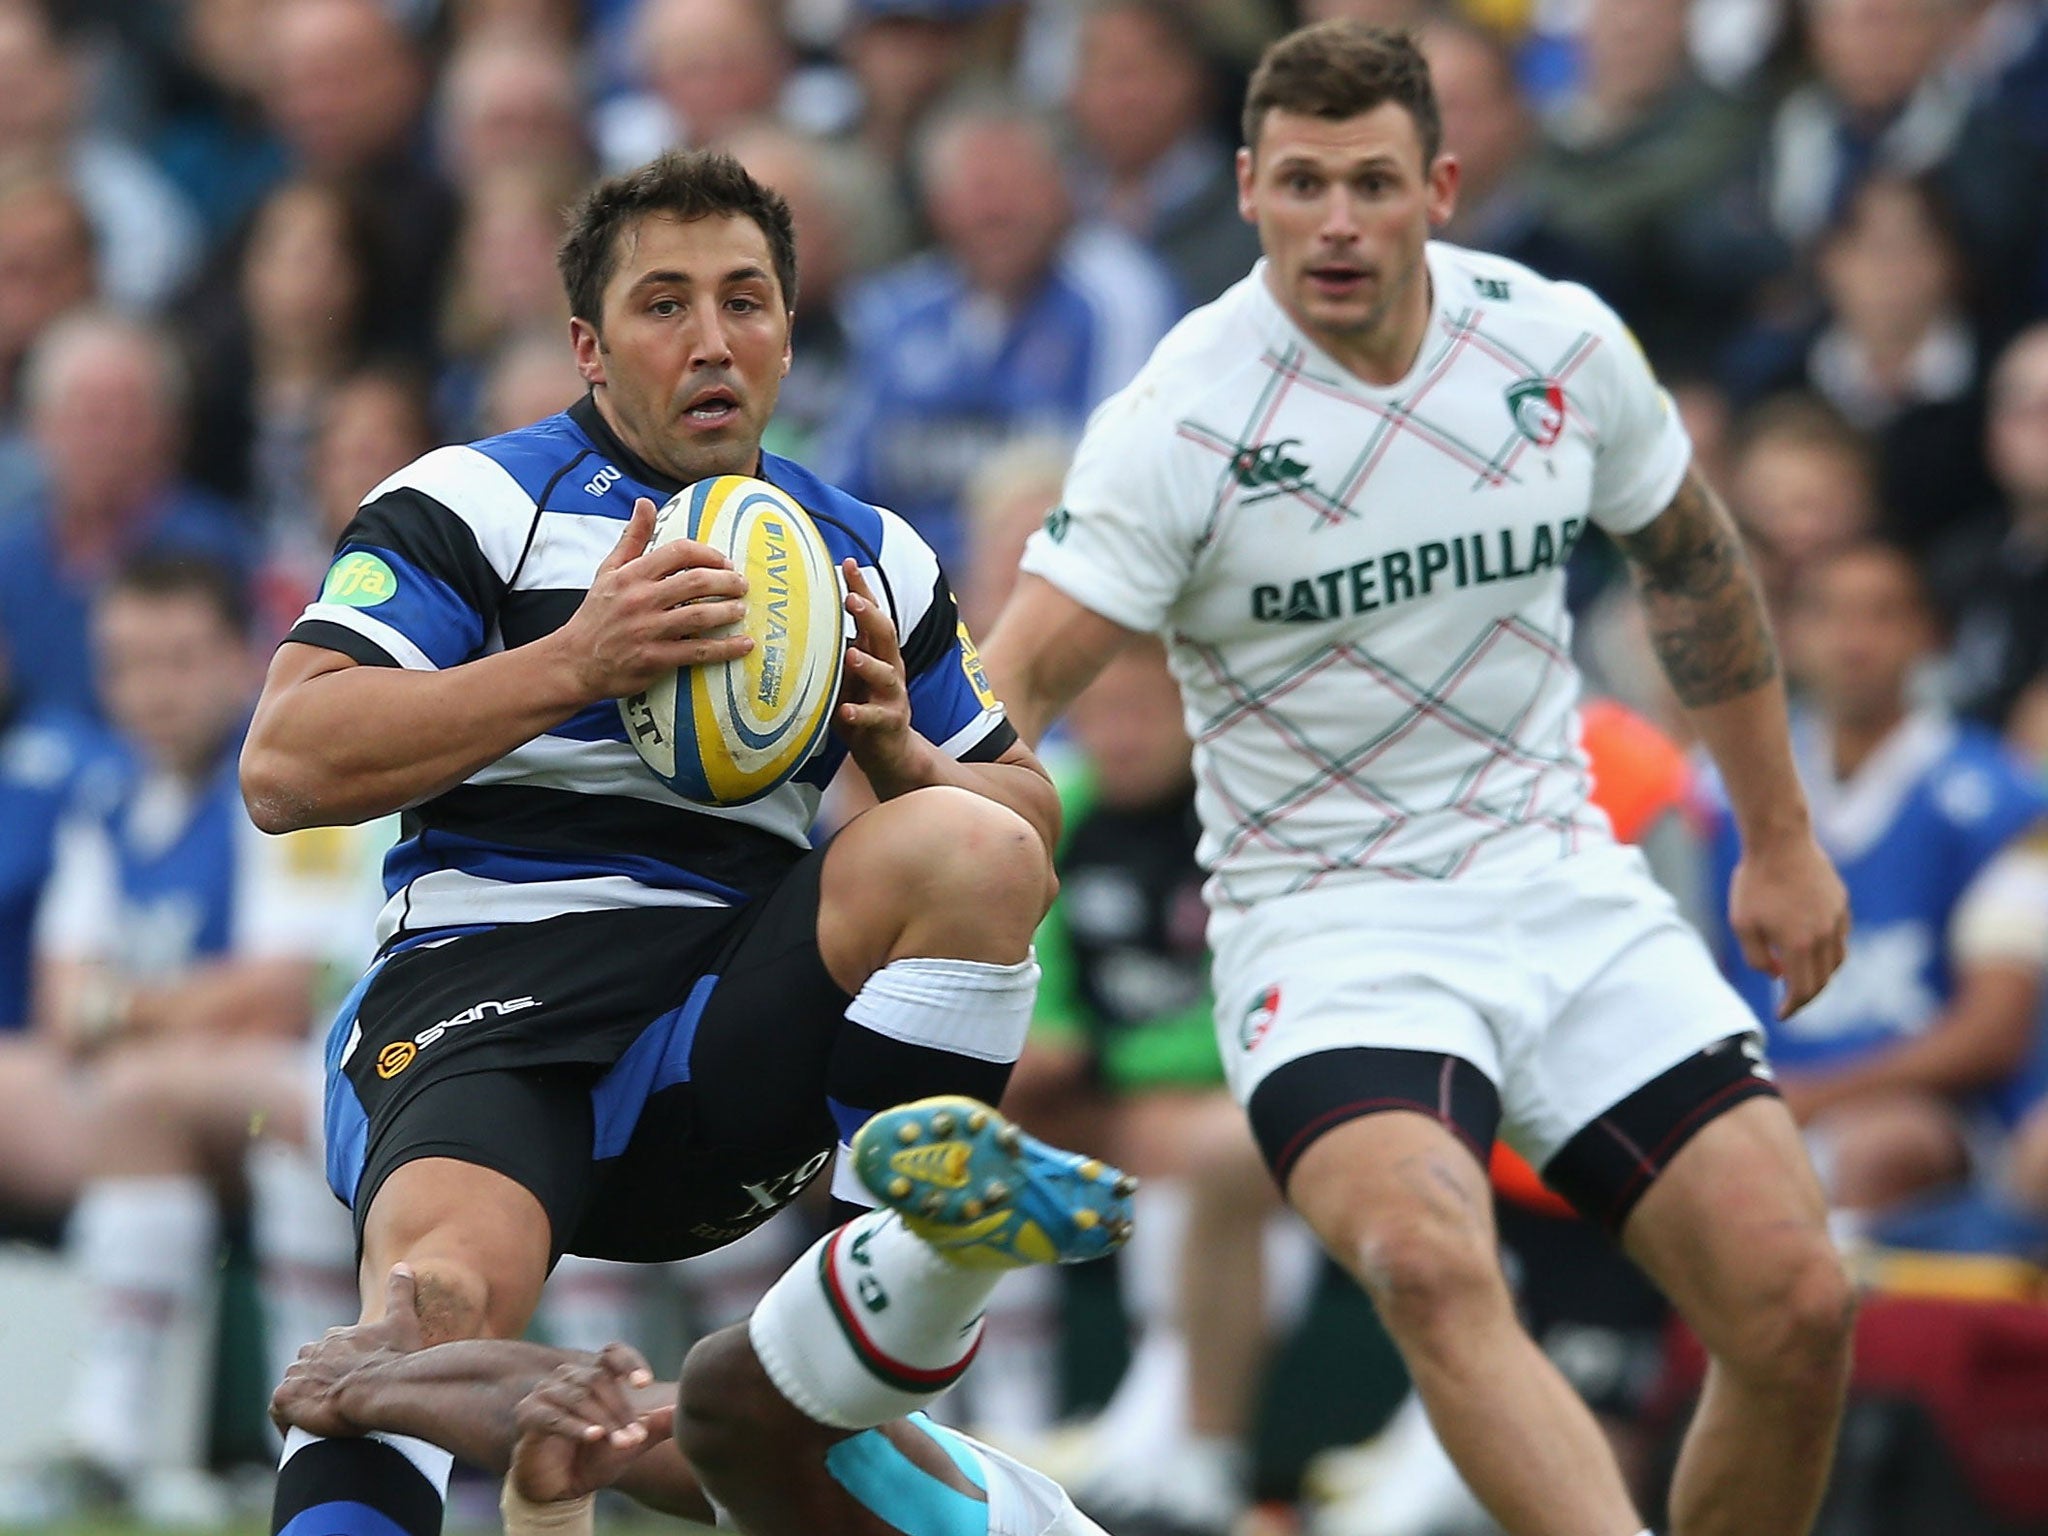 Gavin Henson, left, grew steadily more influential on his first start for Bath